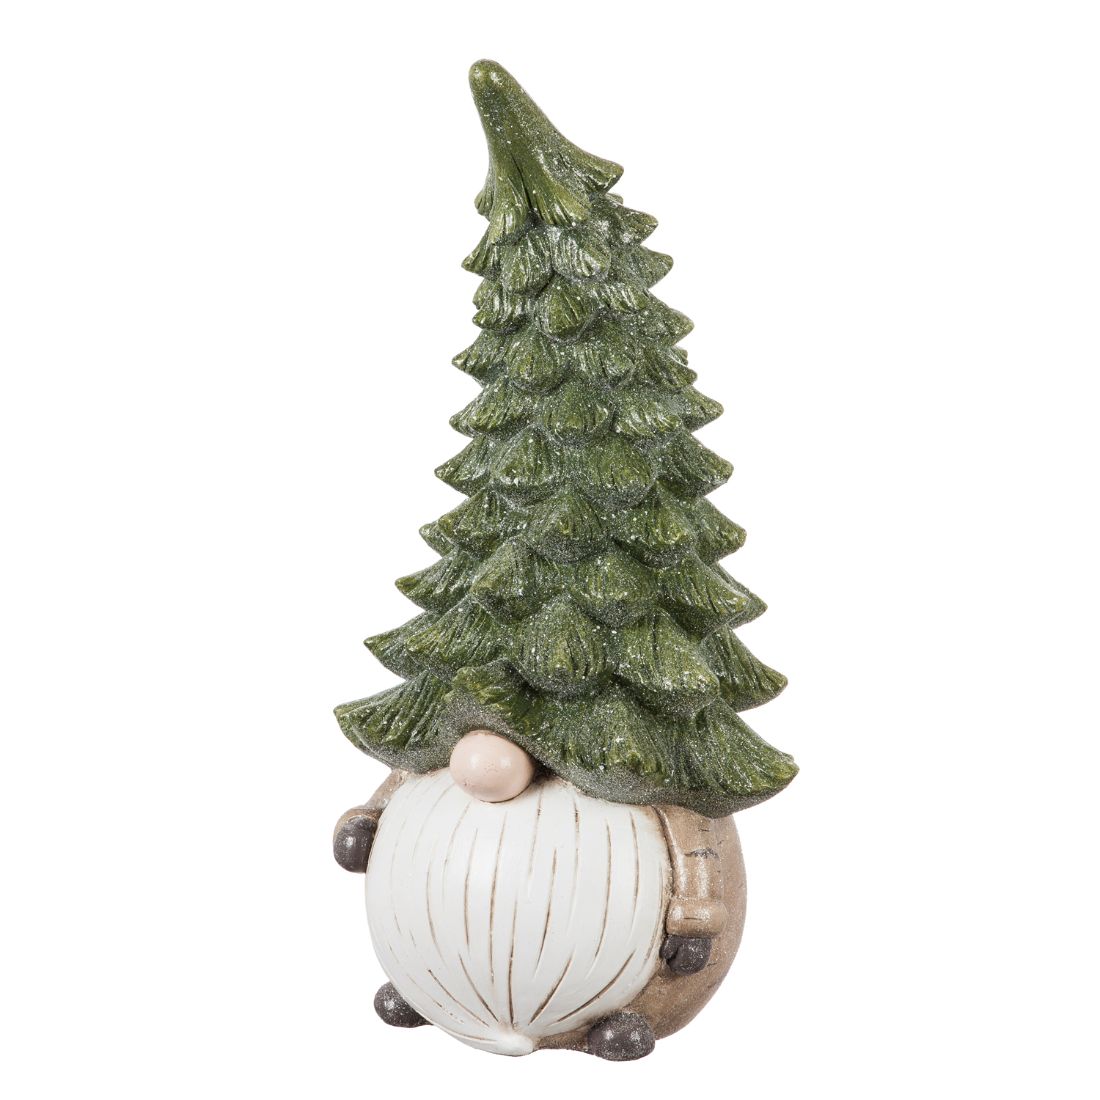 Evergreen Gnome Garden Statuary with Tree Hat